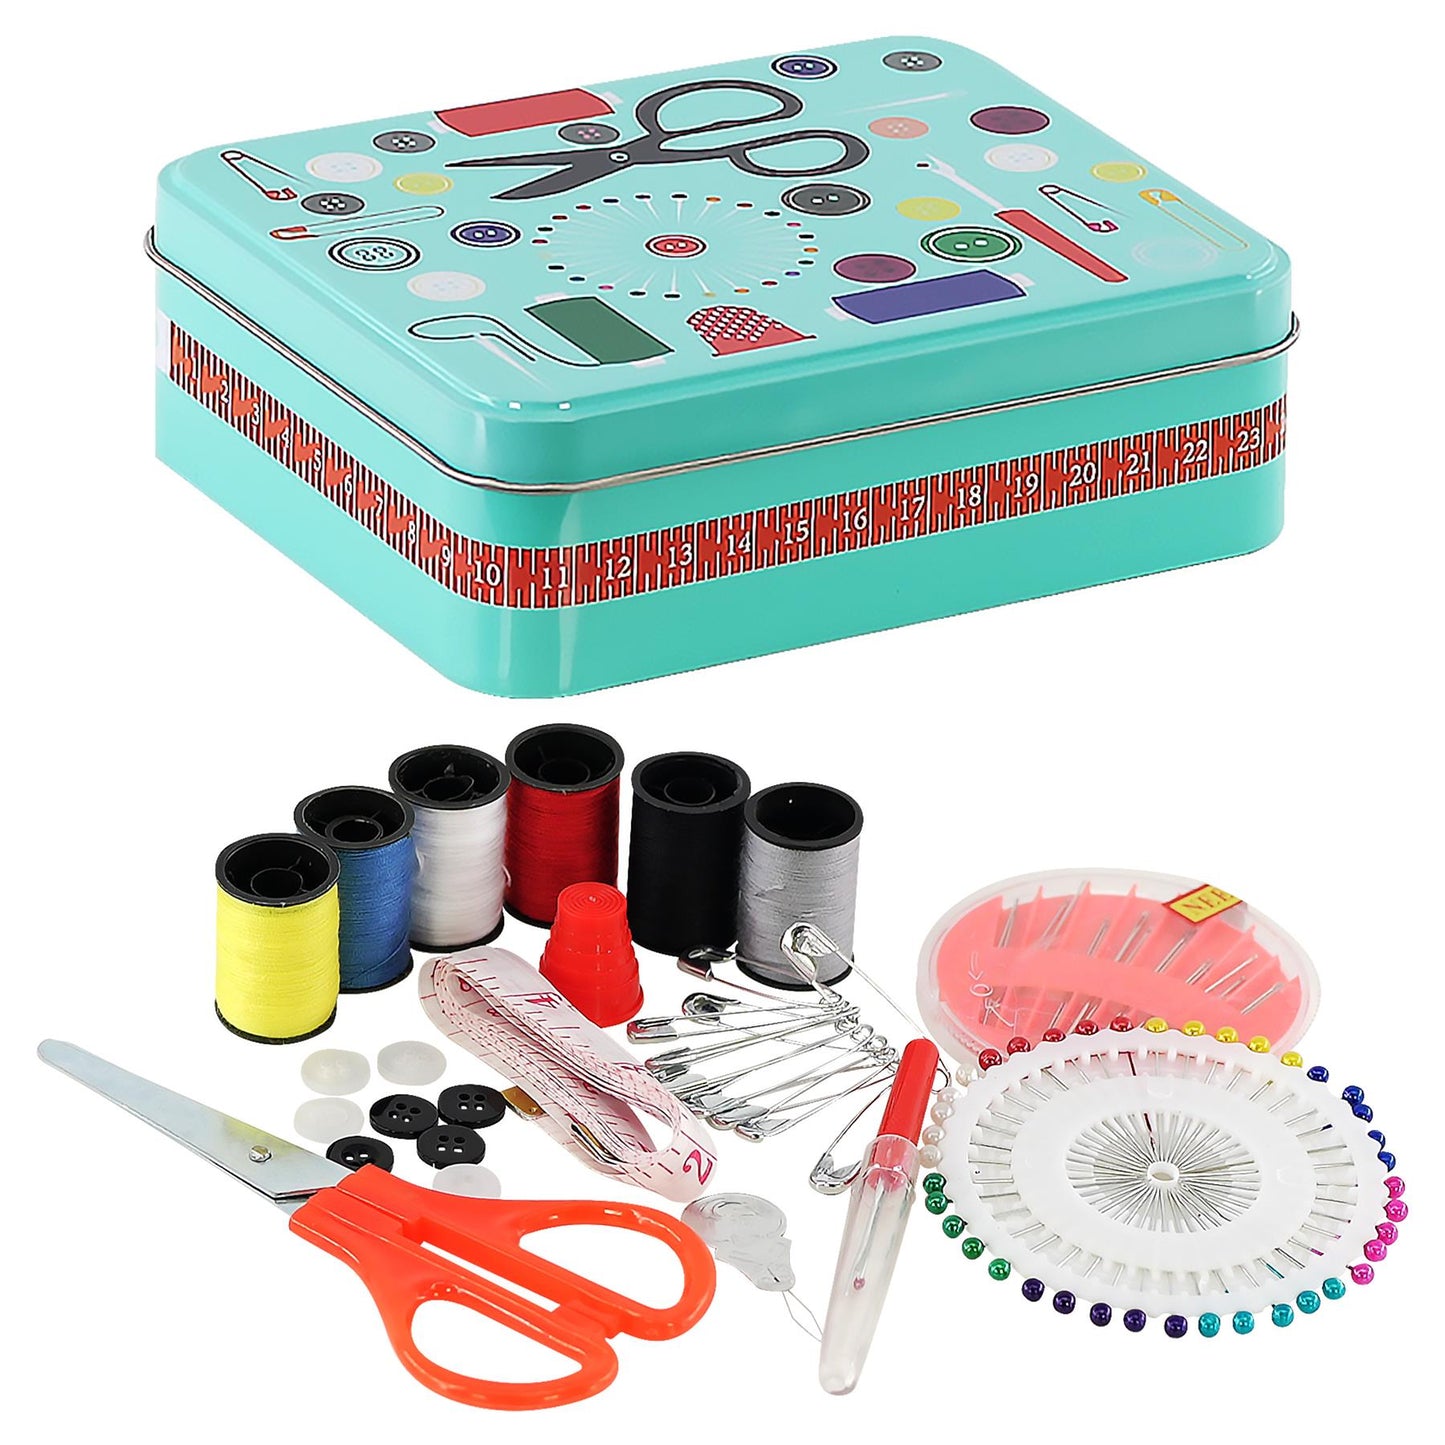 Metal Sewing Box by GEEZY - UKBuyZone